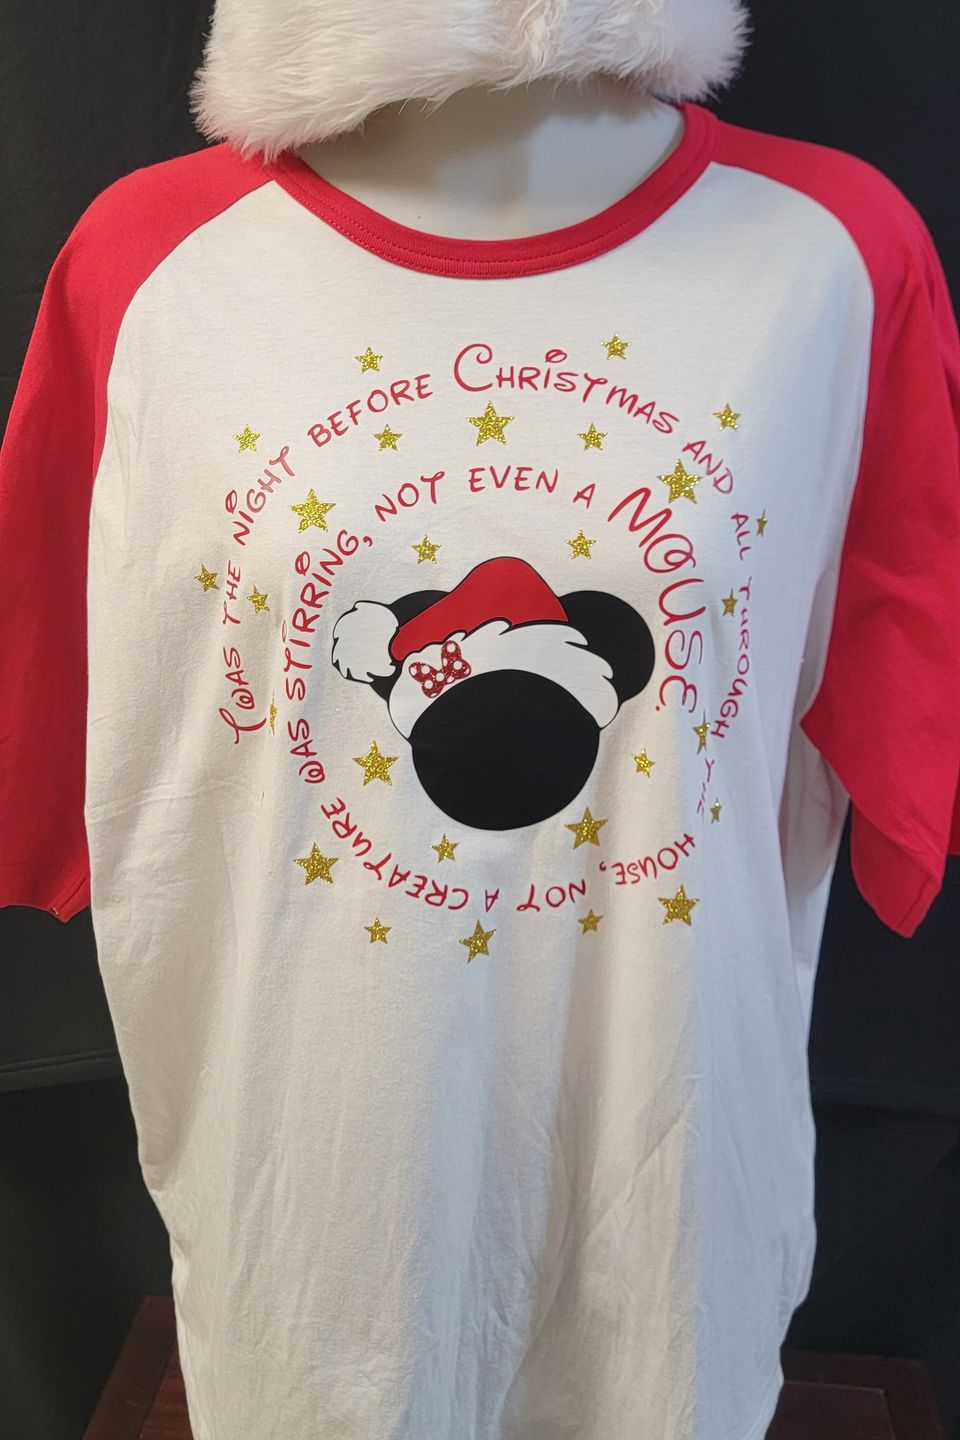 "DTF Direct-to-Film" example T-shirt - Twas the night before Christmas story